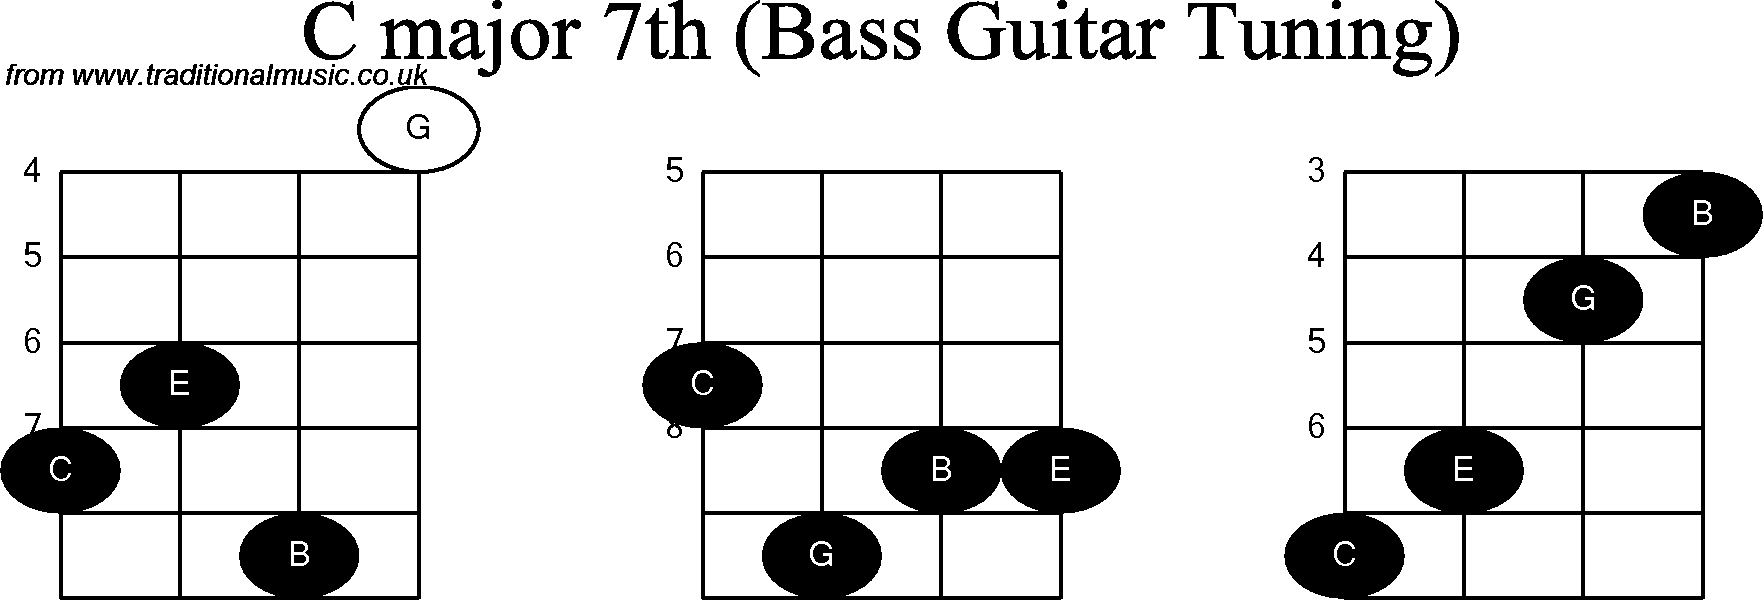 Bass Guitar chord charts for: C Major 7th